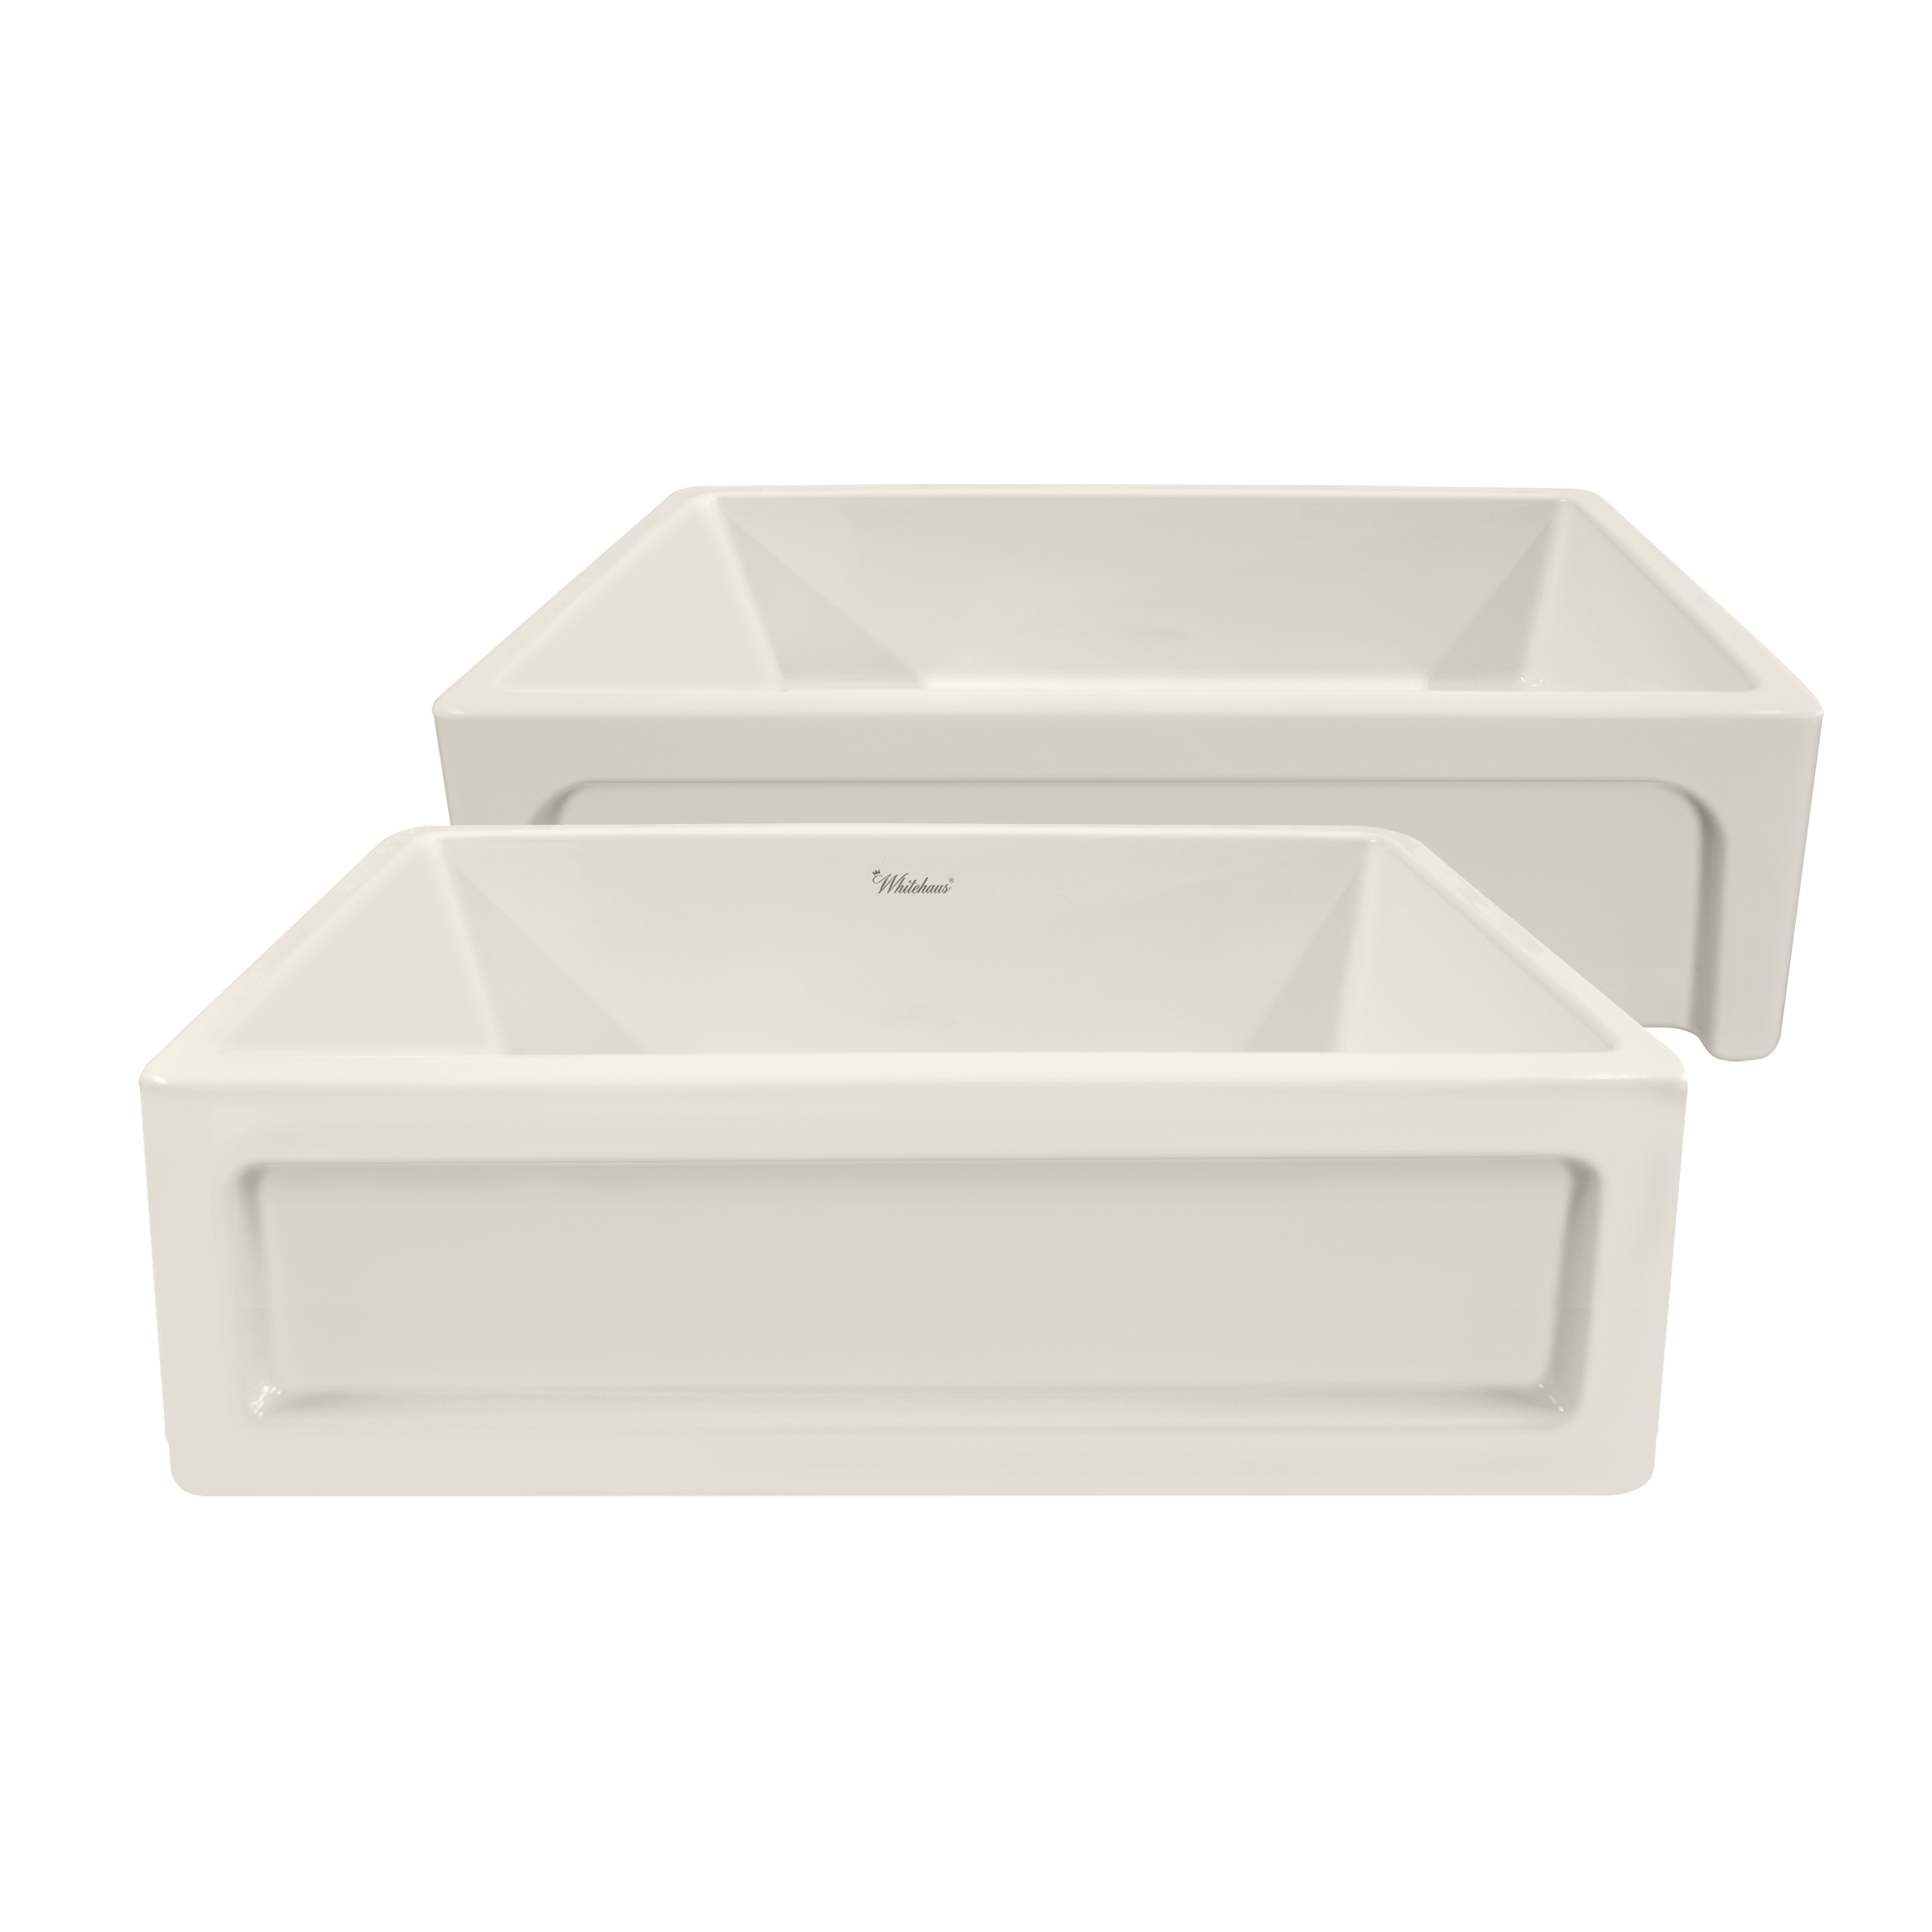 Shakerhaus 33" Reversible Kitchen Fireclay Sink with Shaker Design Front Apron on one Side and an Elegant Beveled Front Apron on